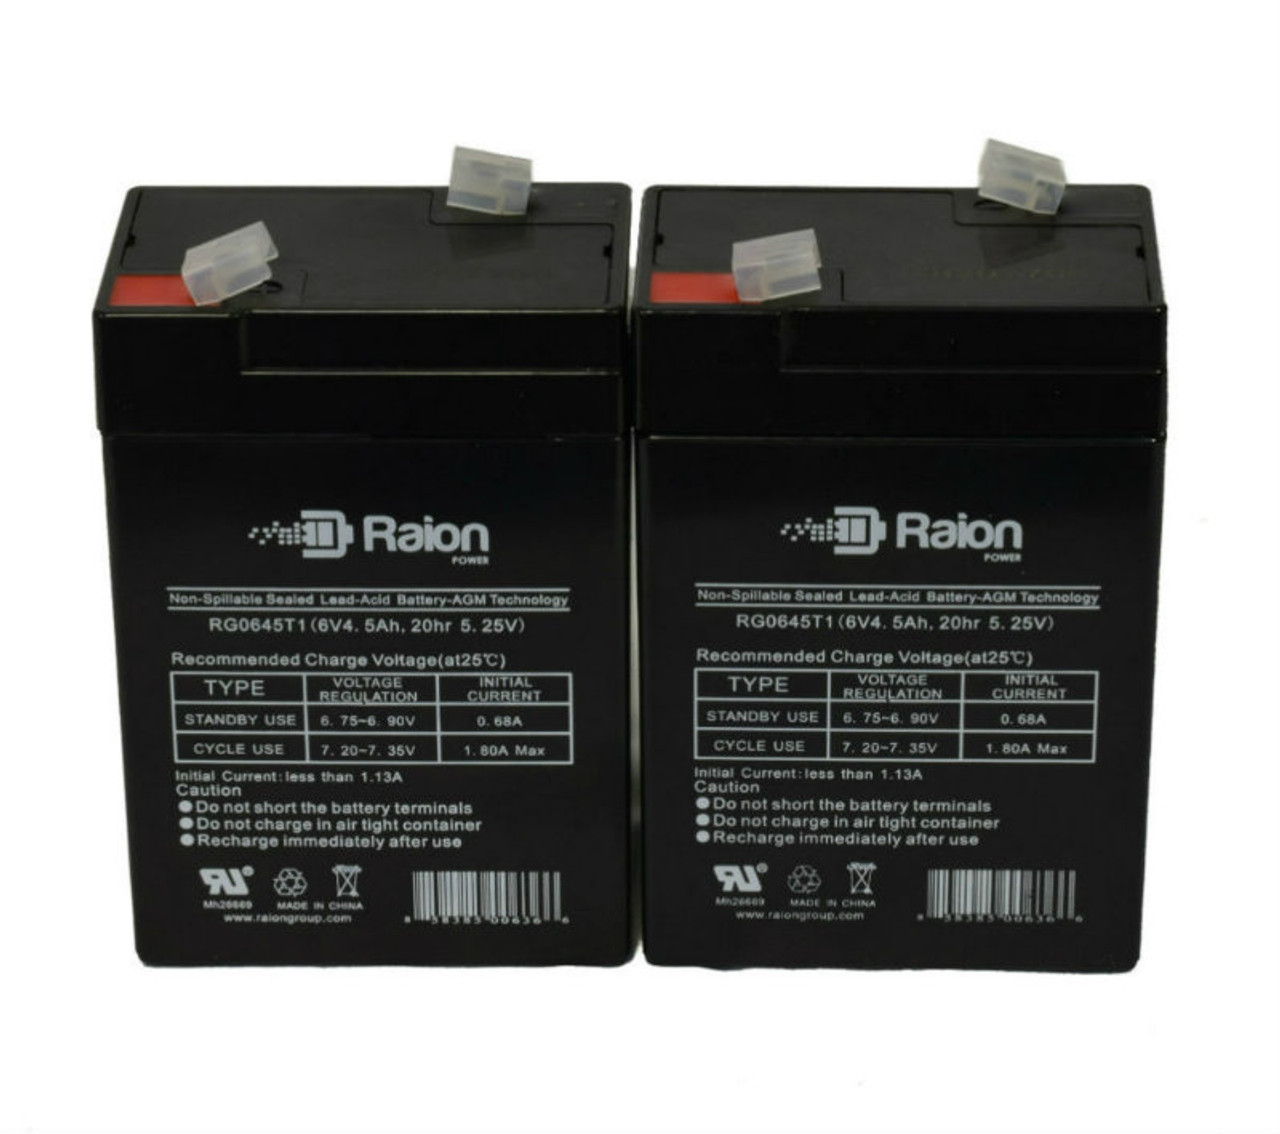 Raion Power 6 Volt 4.5Ah RG0645T1 Replacement Battery for RS Pro 537-5422 - 2 Pack